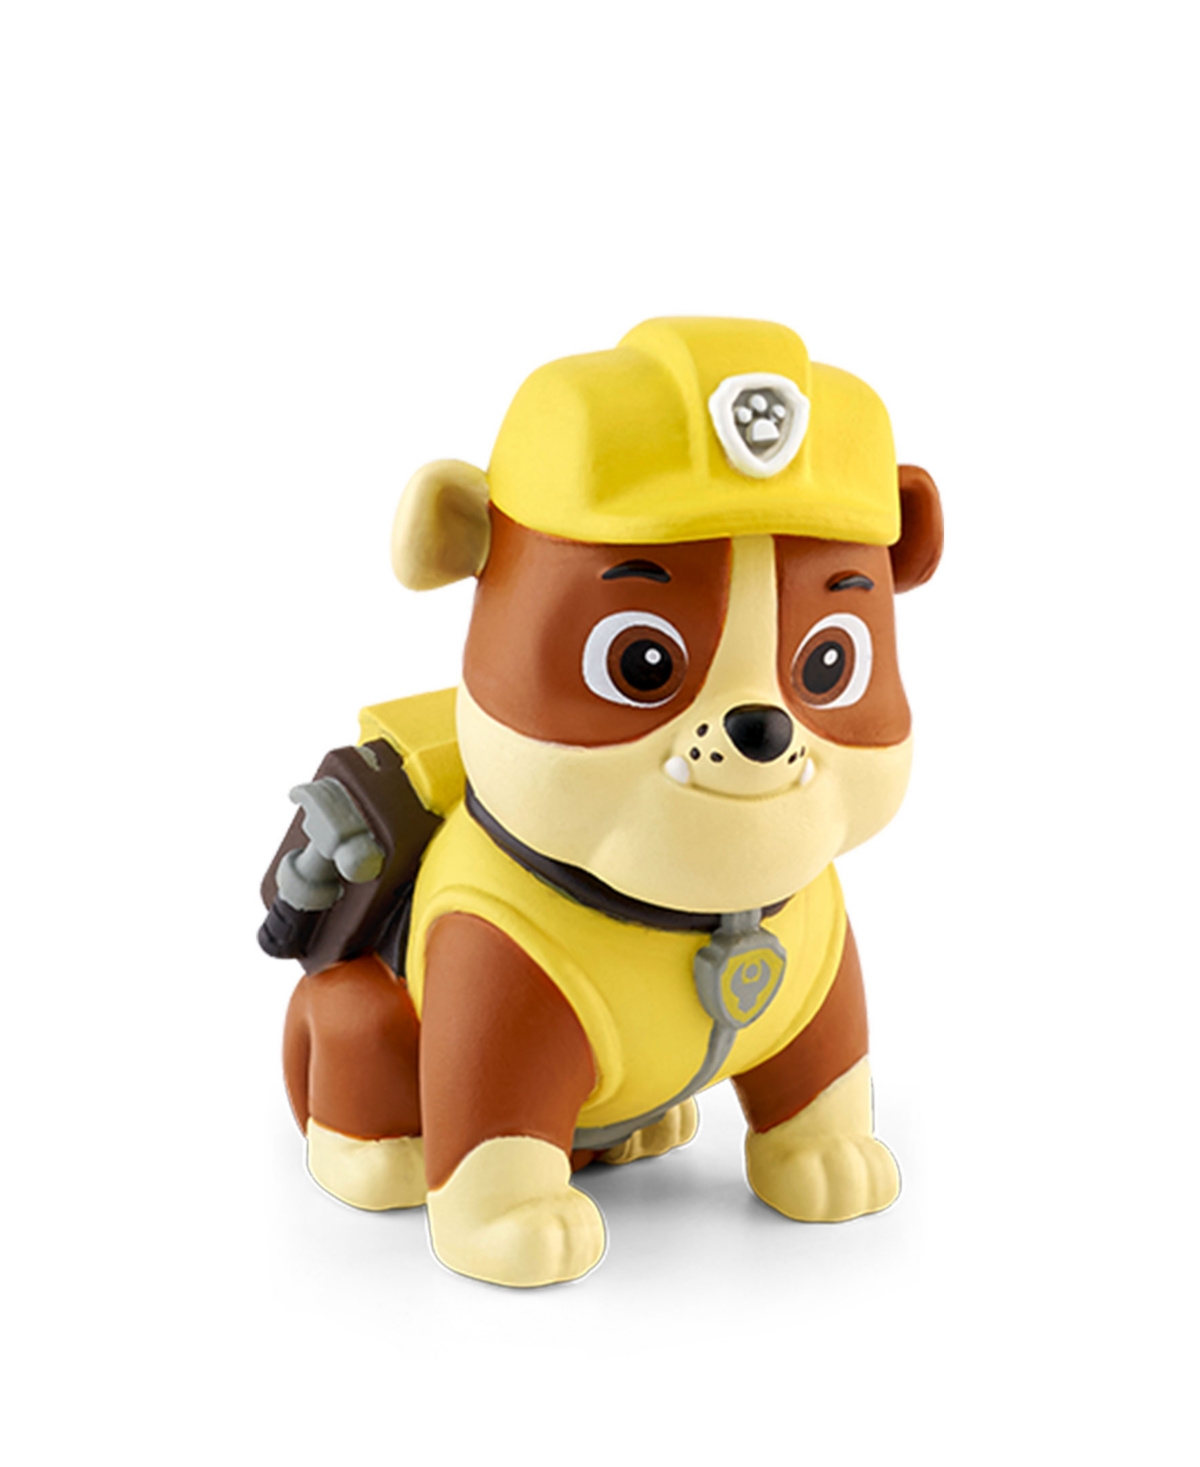 Tonies Paw Patrol Rubble Audio Play Figurine In No Color